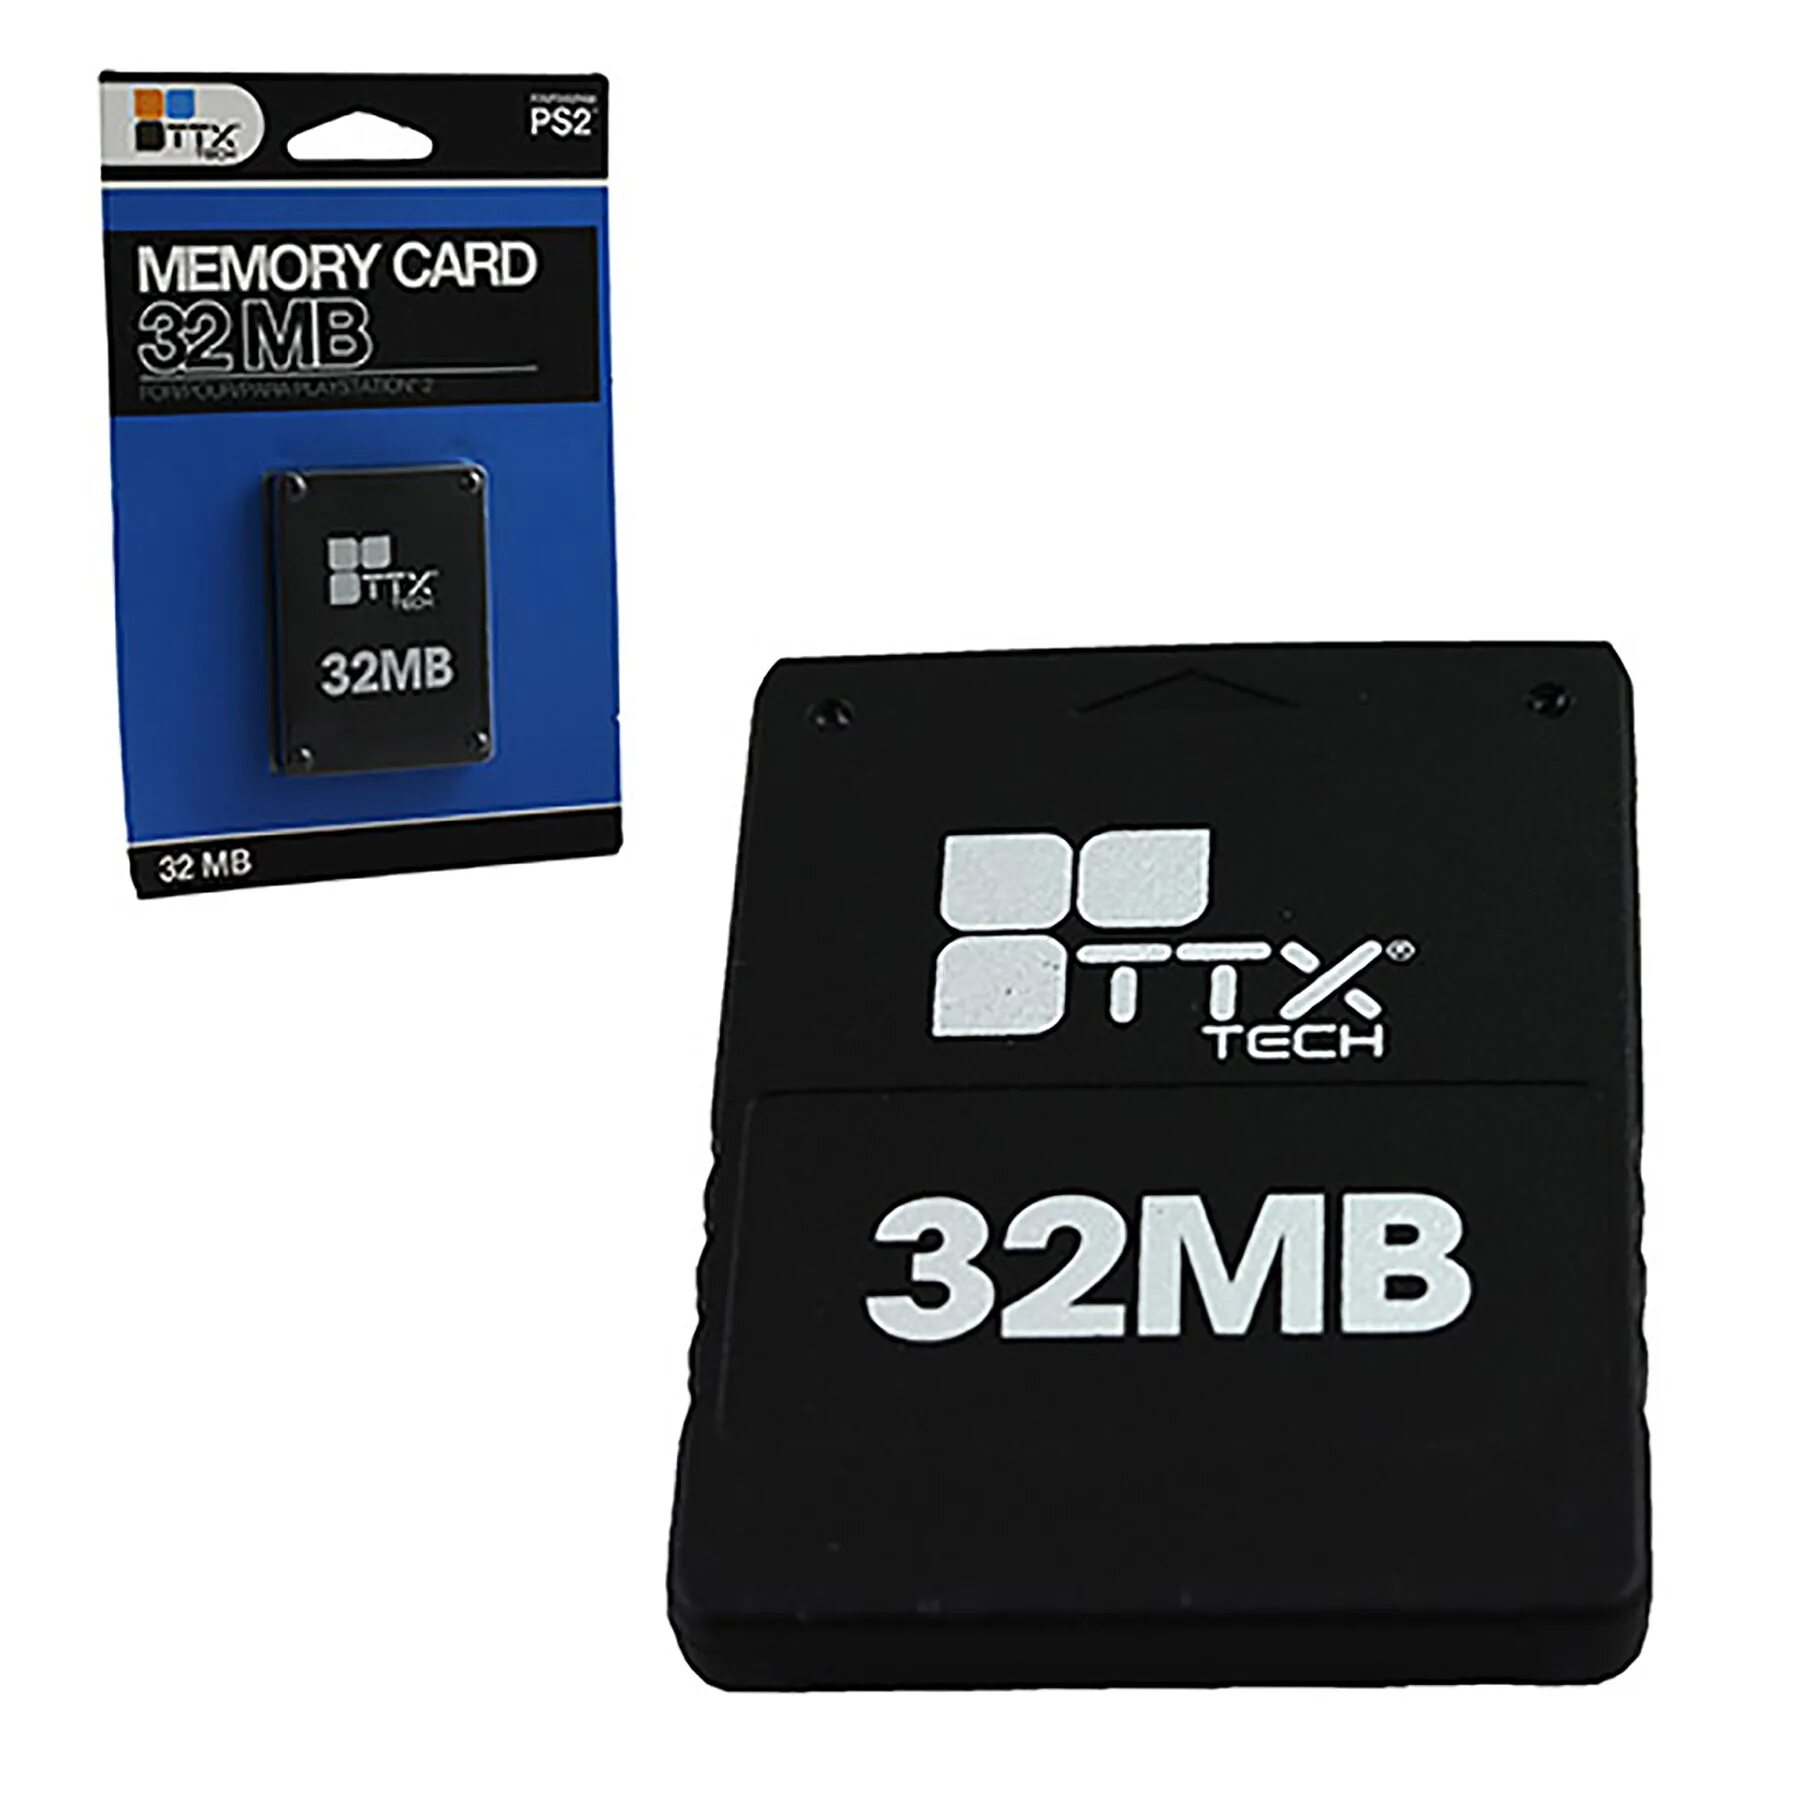 Ps2 Memory Card 8mb. Memory Card 32 MB EXEQ ps2. Карта памяти 32mb для ps2. Ps2 Memory Card steakers. 2 мемори